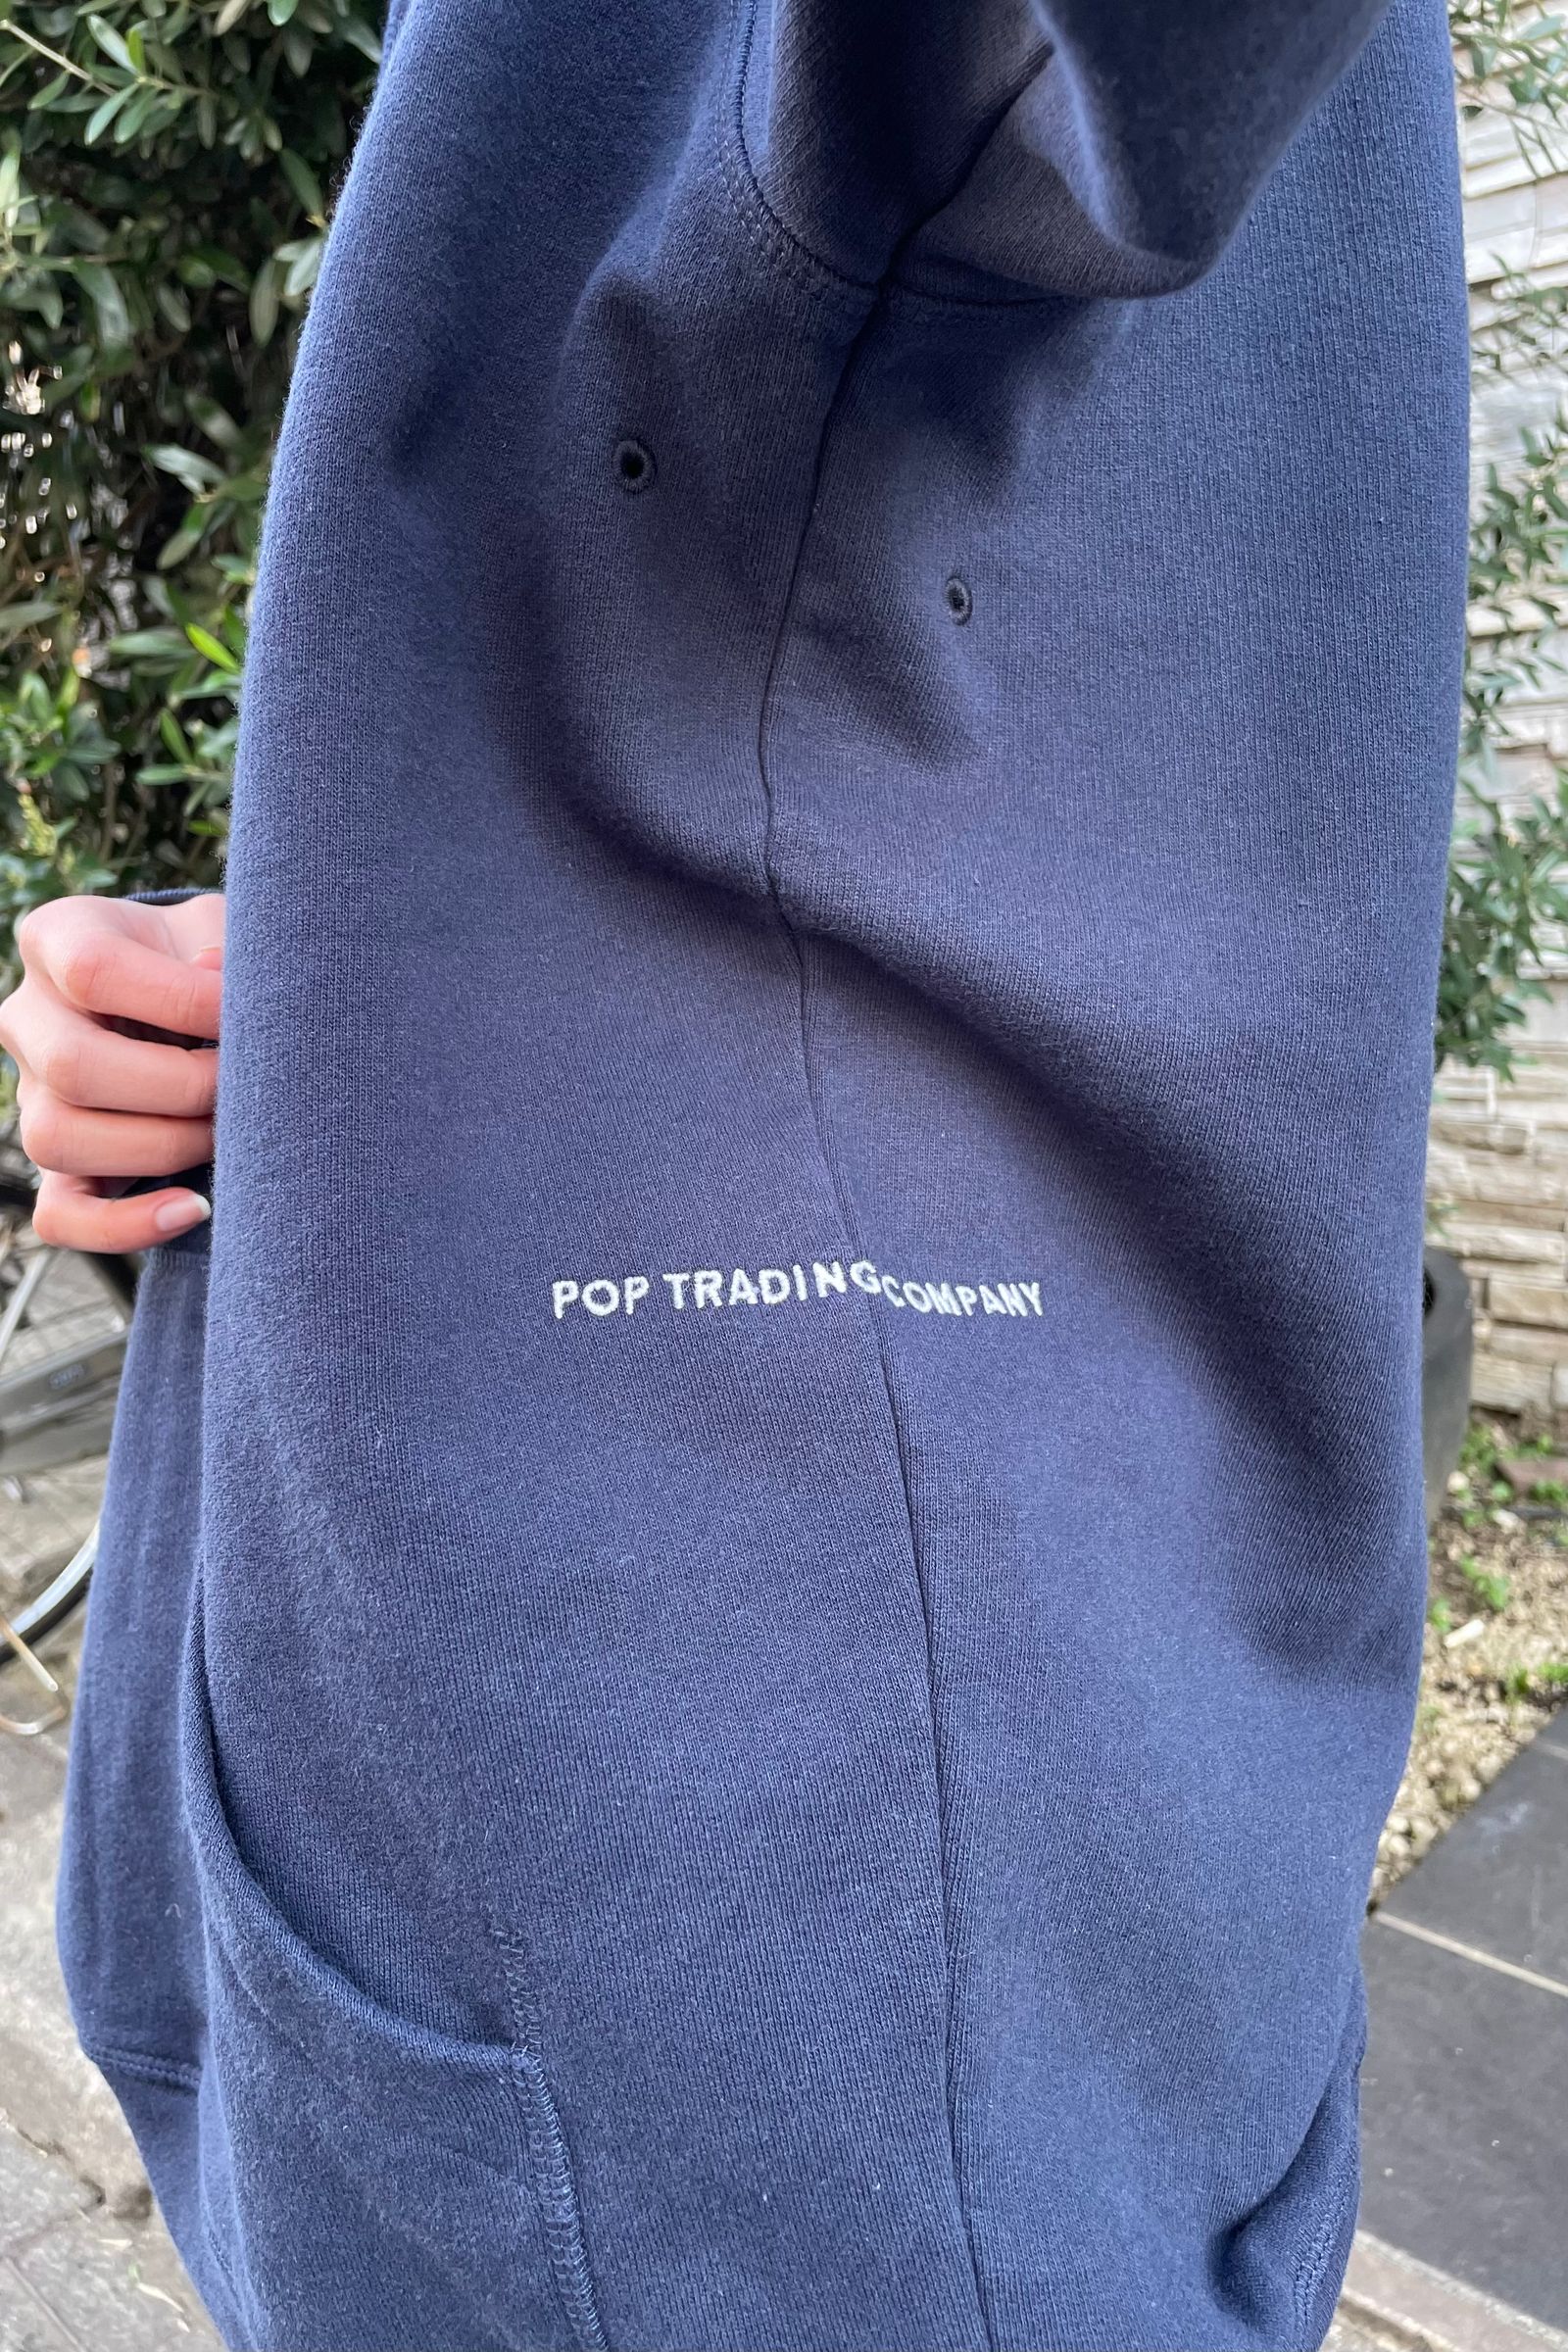 Pop Trading Company - captain embroidery hooded sweat -navy